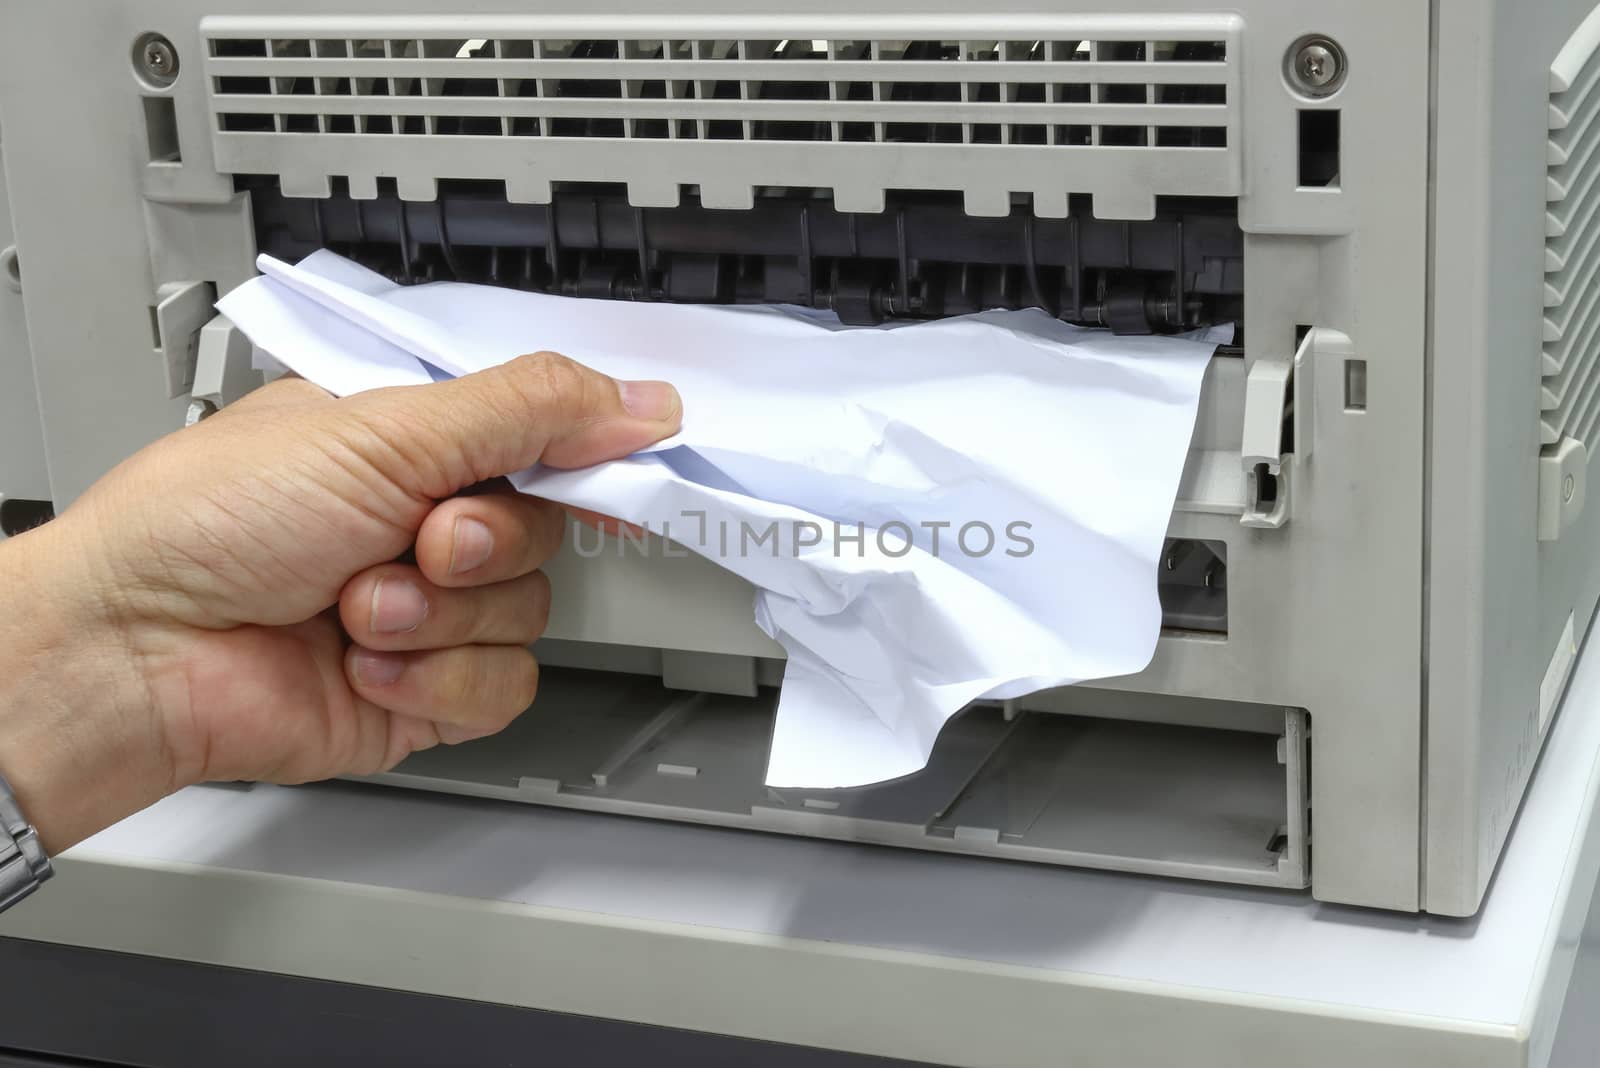 Technicians Removing Paper Stuck, Paper Jam In Printer At Office